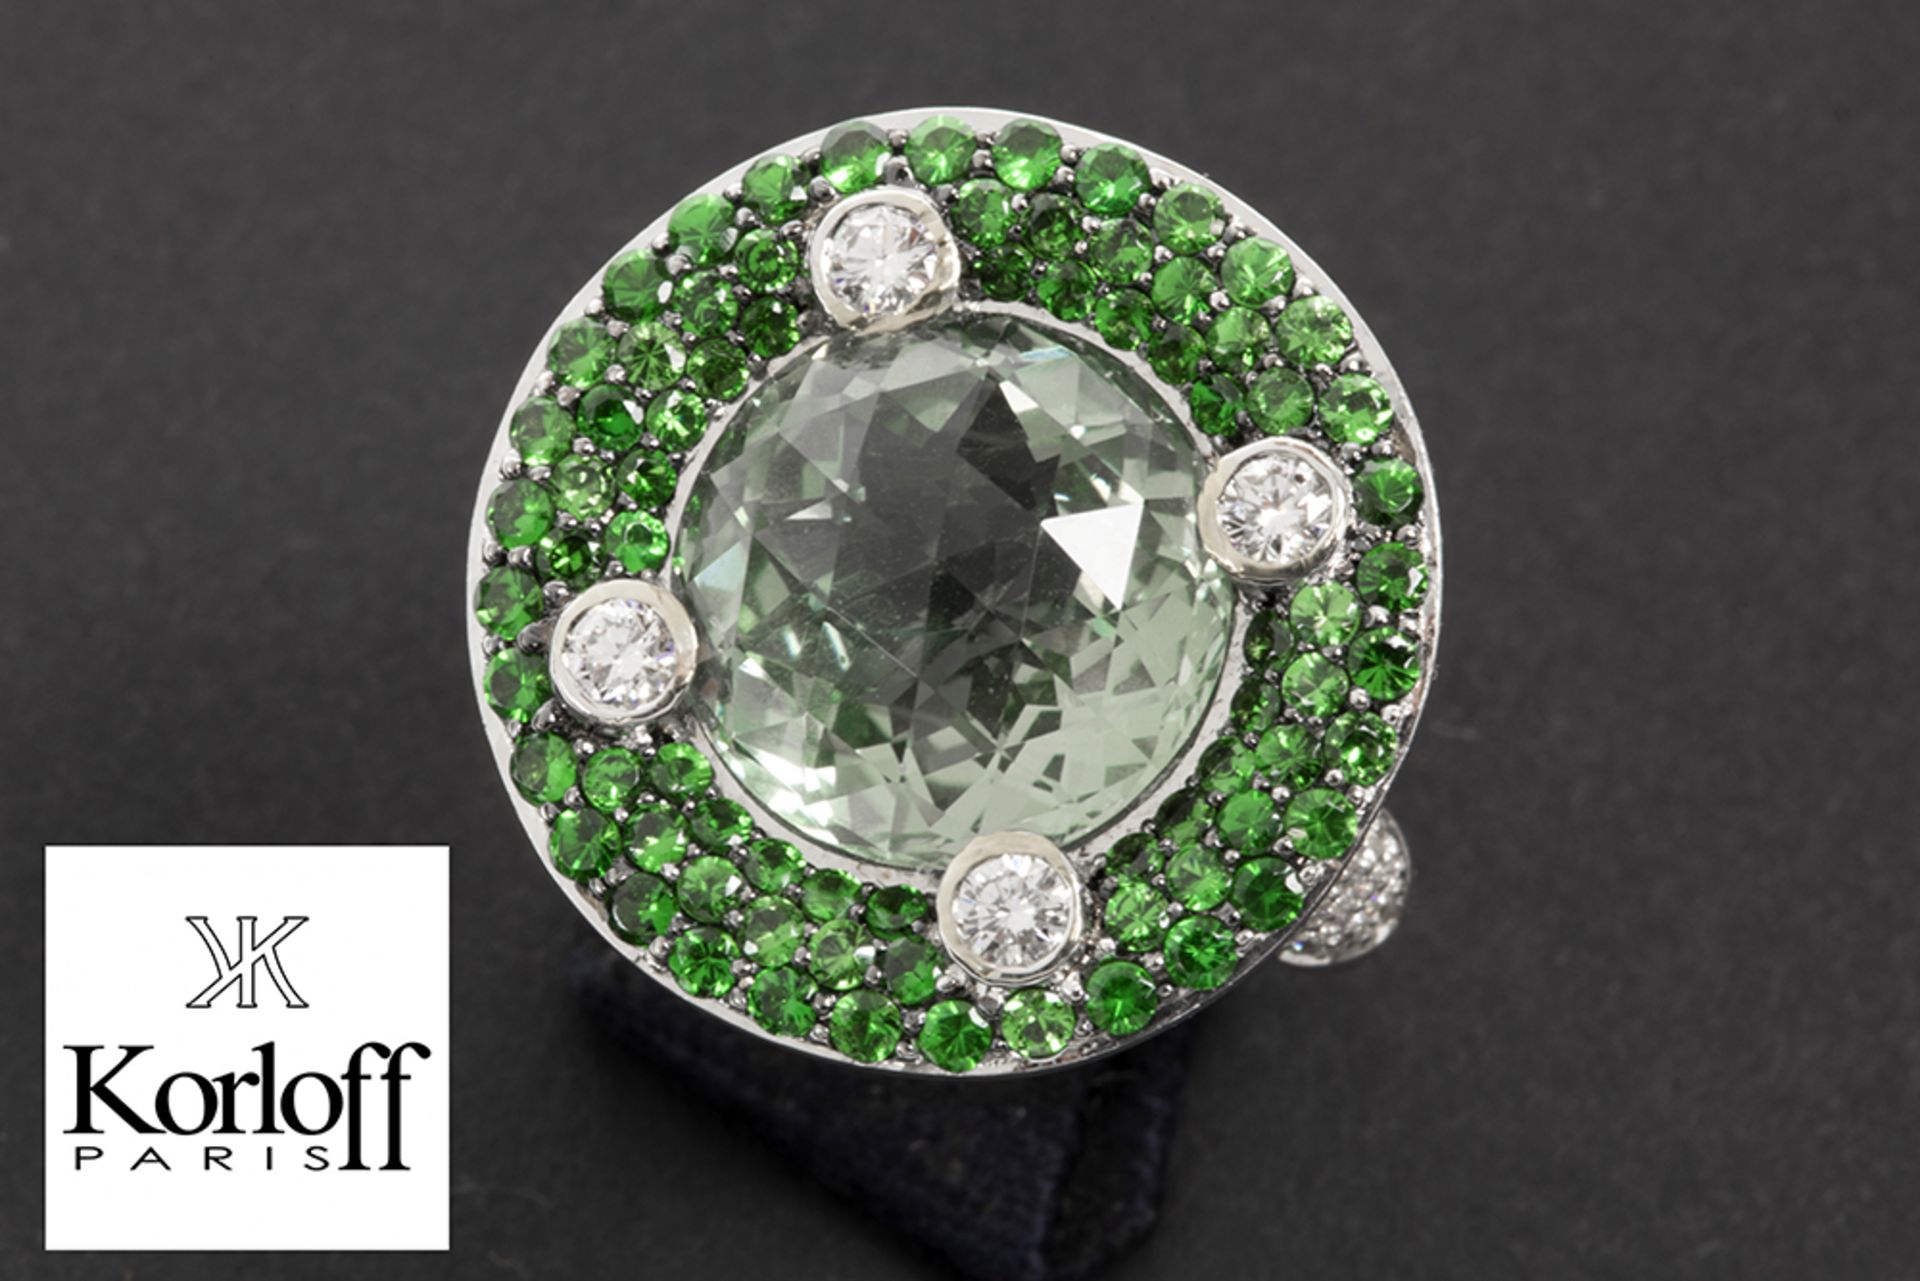 Korloff signed ring with a characteristic design in white gold (18 carat) with a ca 13 carat green